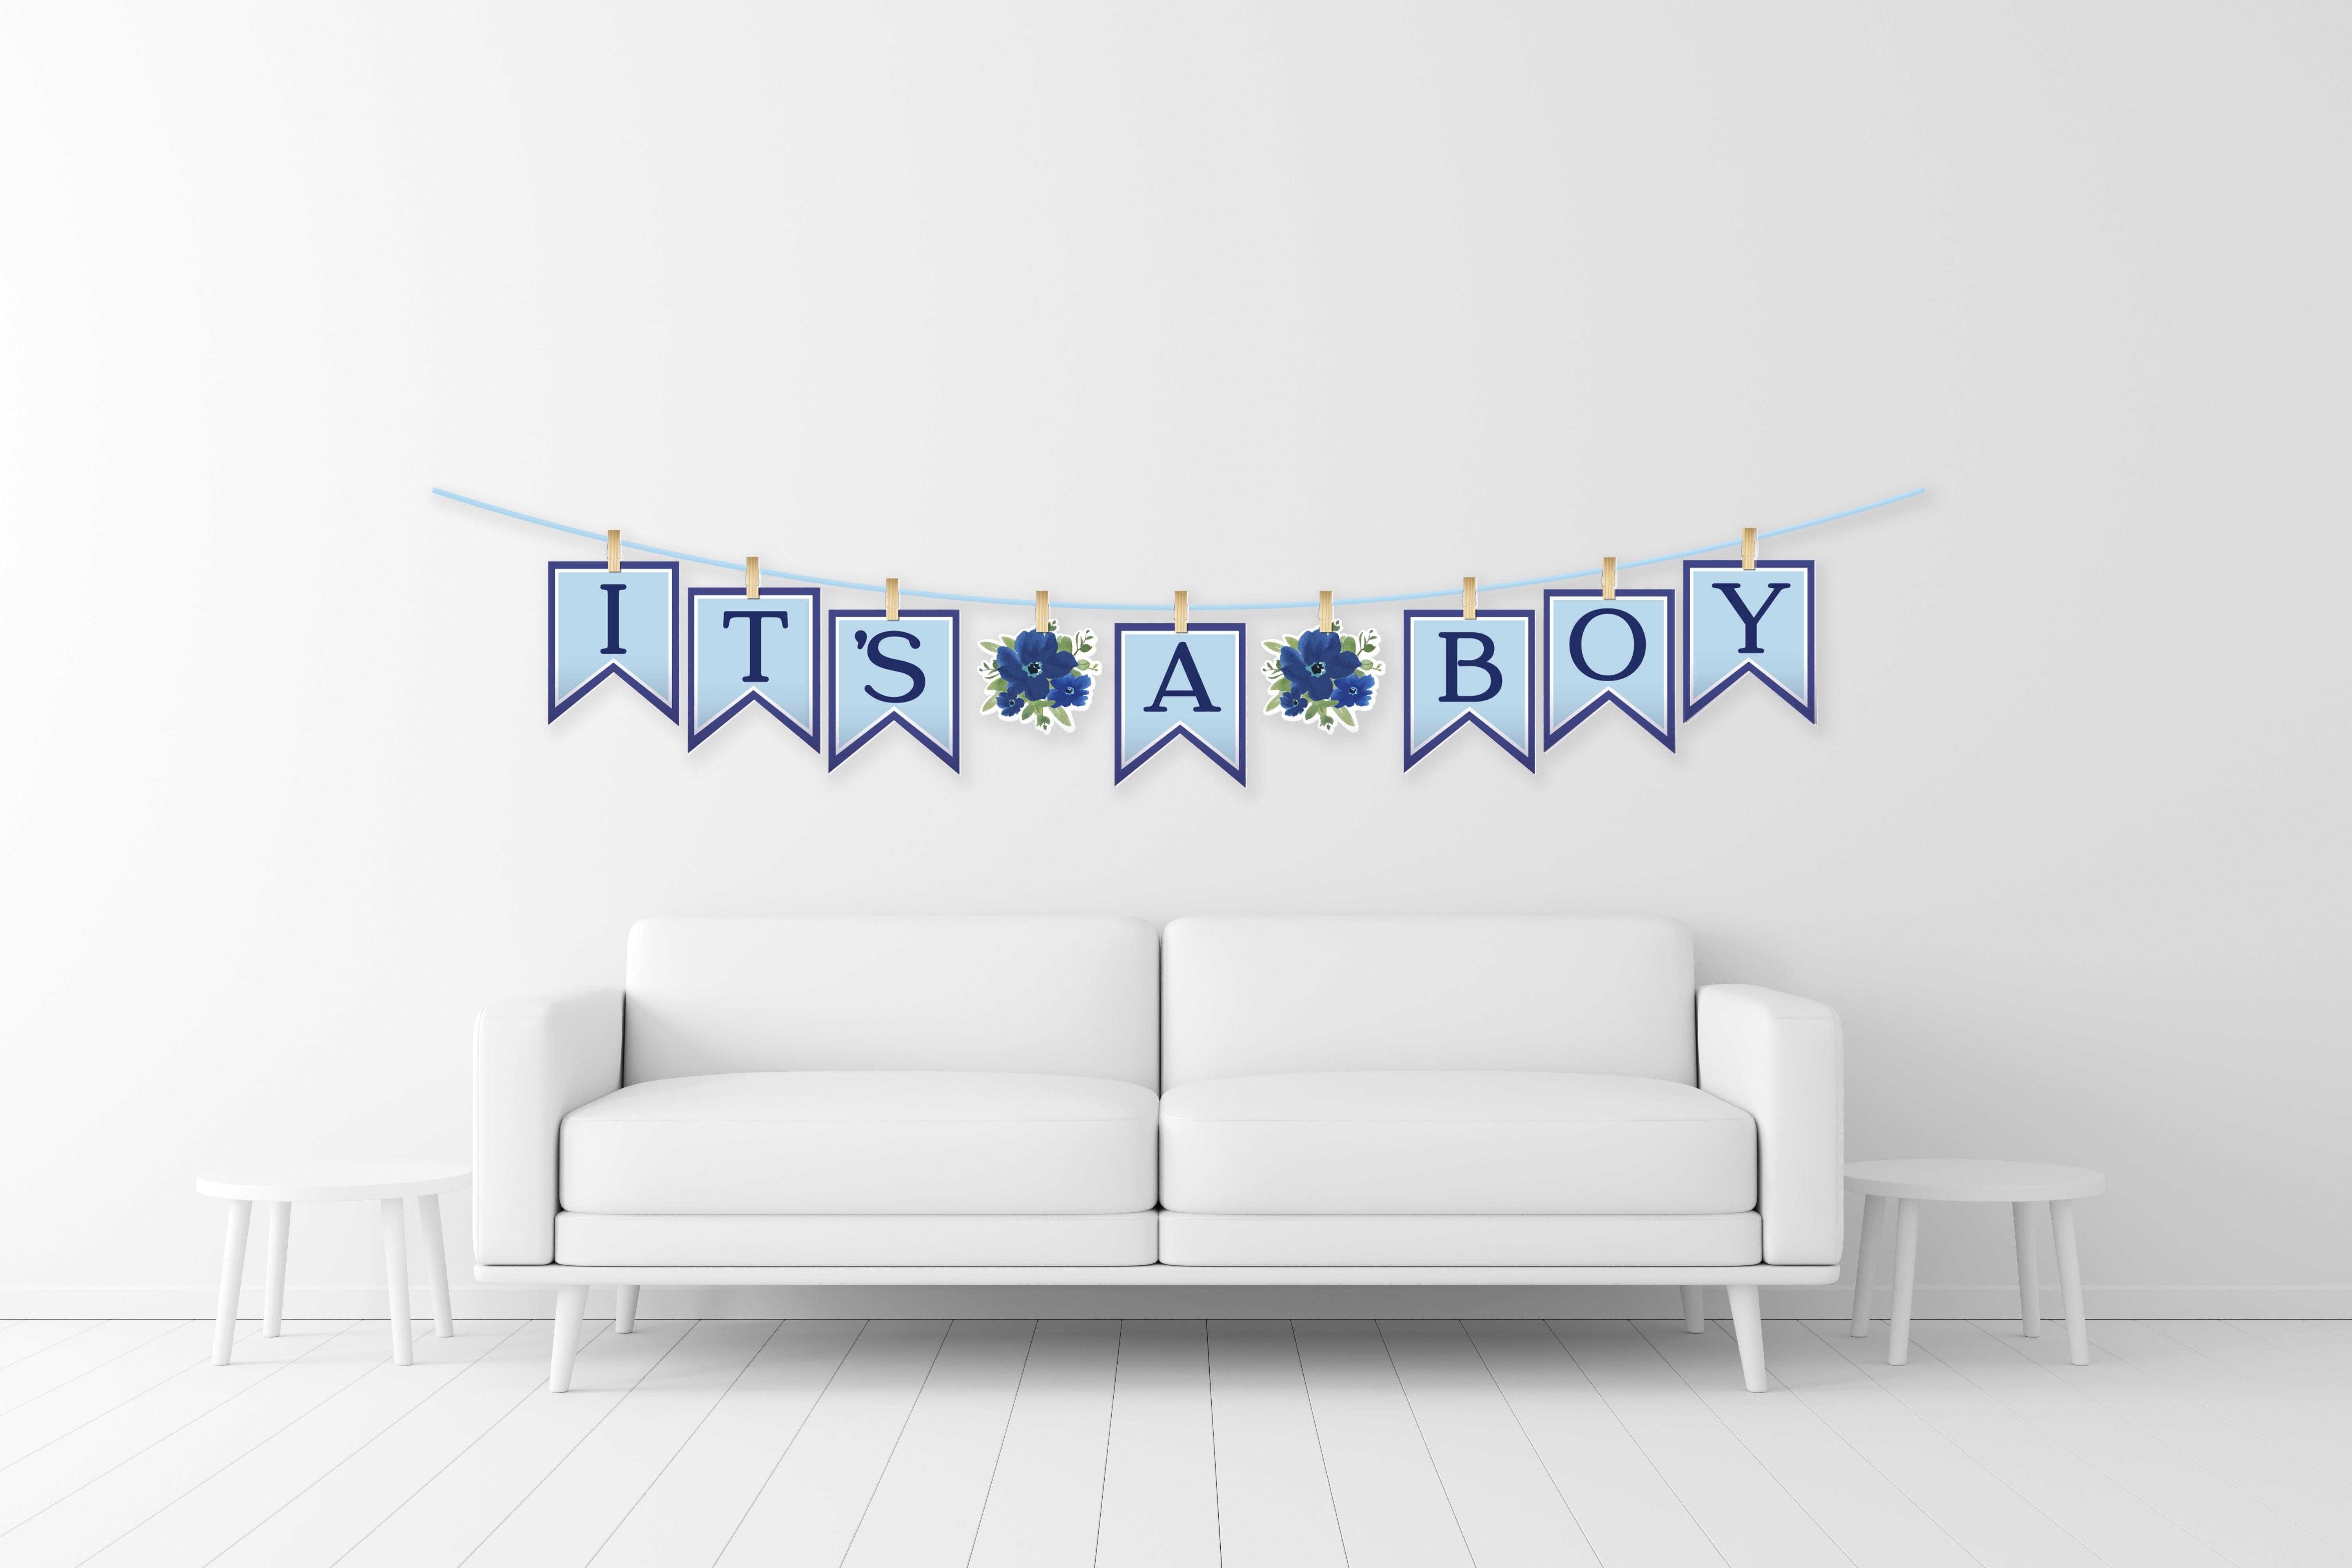 It's a Boy Baby in Bloom Baby Shower Clothespin Pennant Banner, 12ft